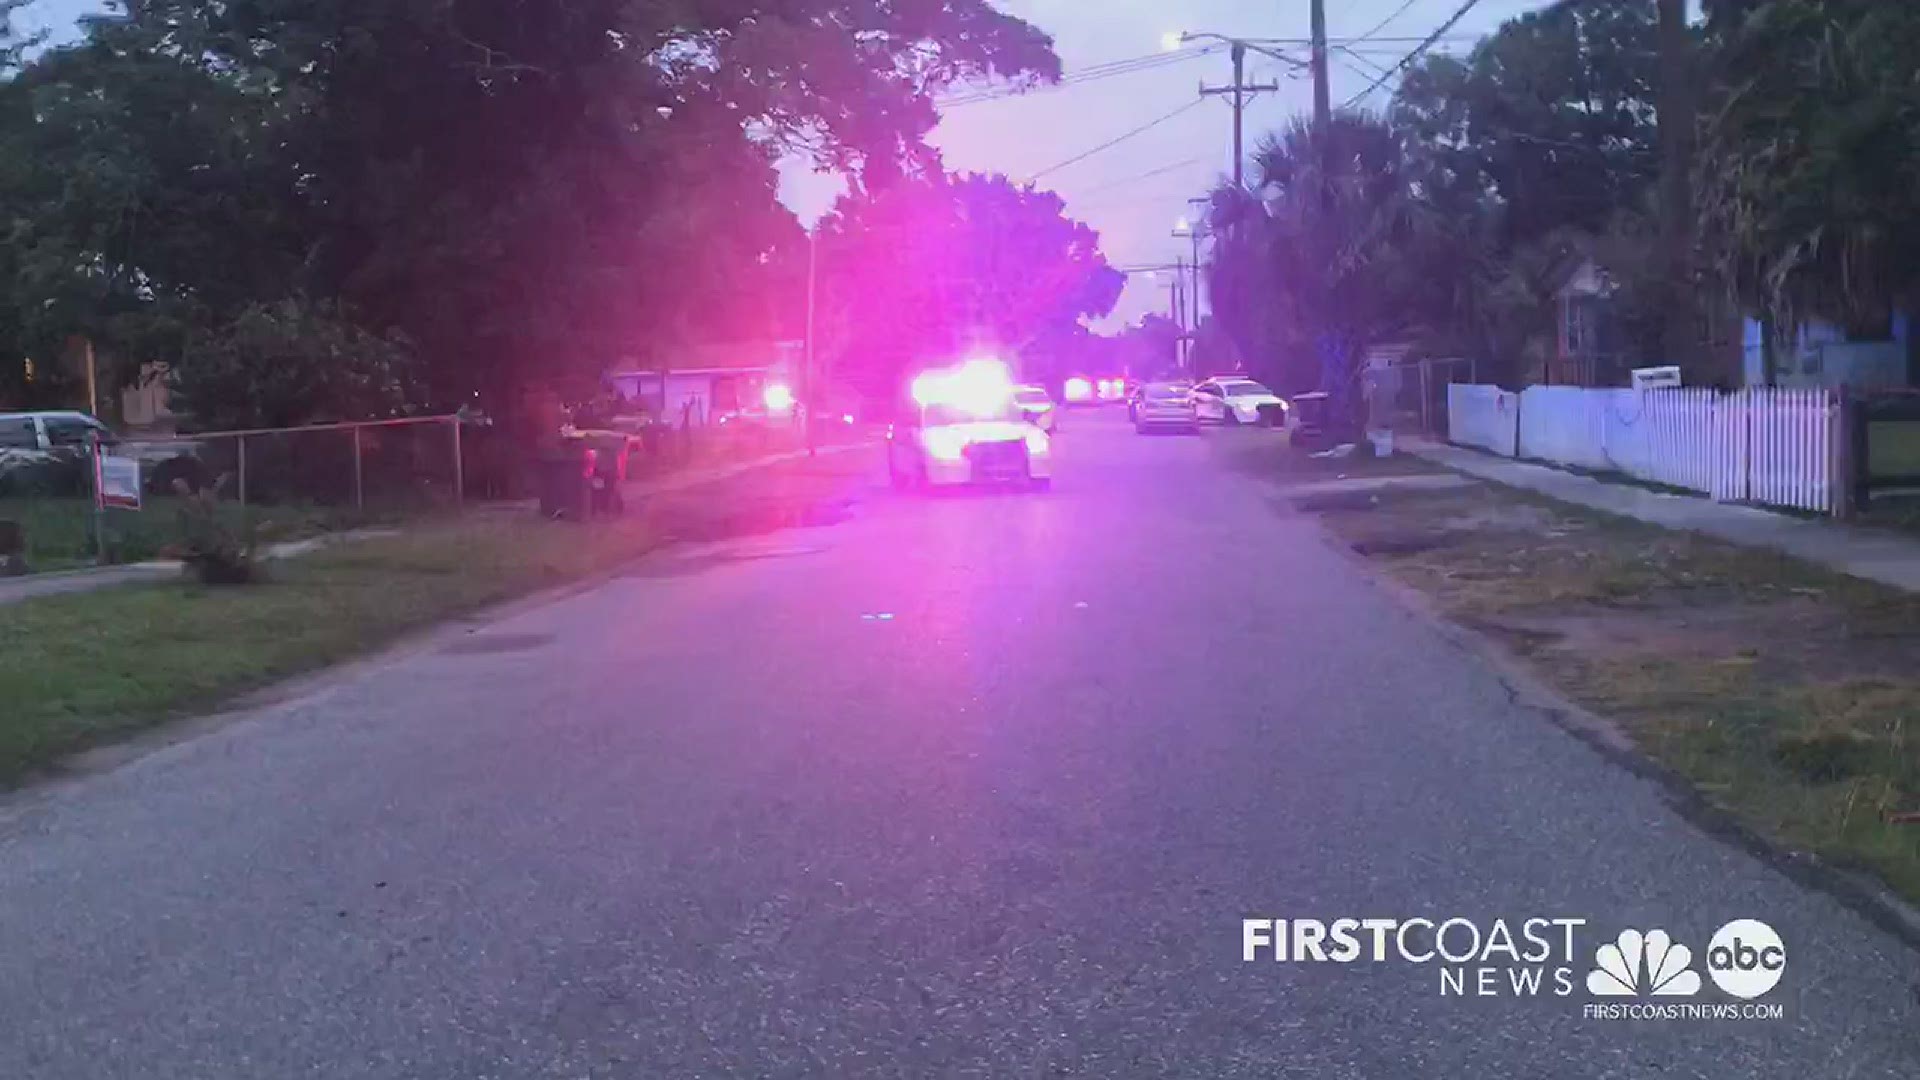 The Jacksonville Sheriff's Office is on the scene of a homicide investigation in the Robinson's Addition neighborhood.